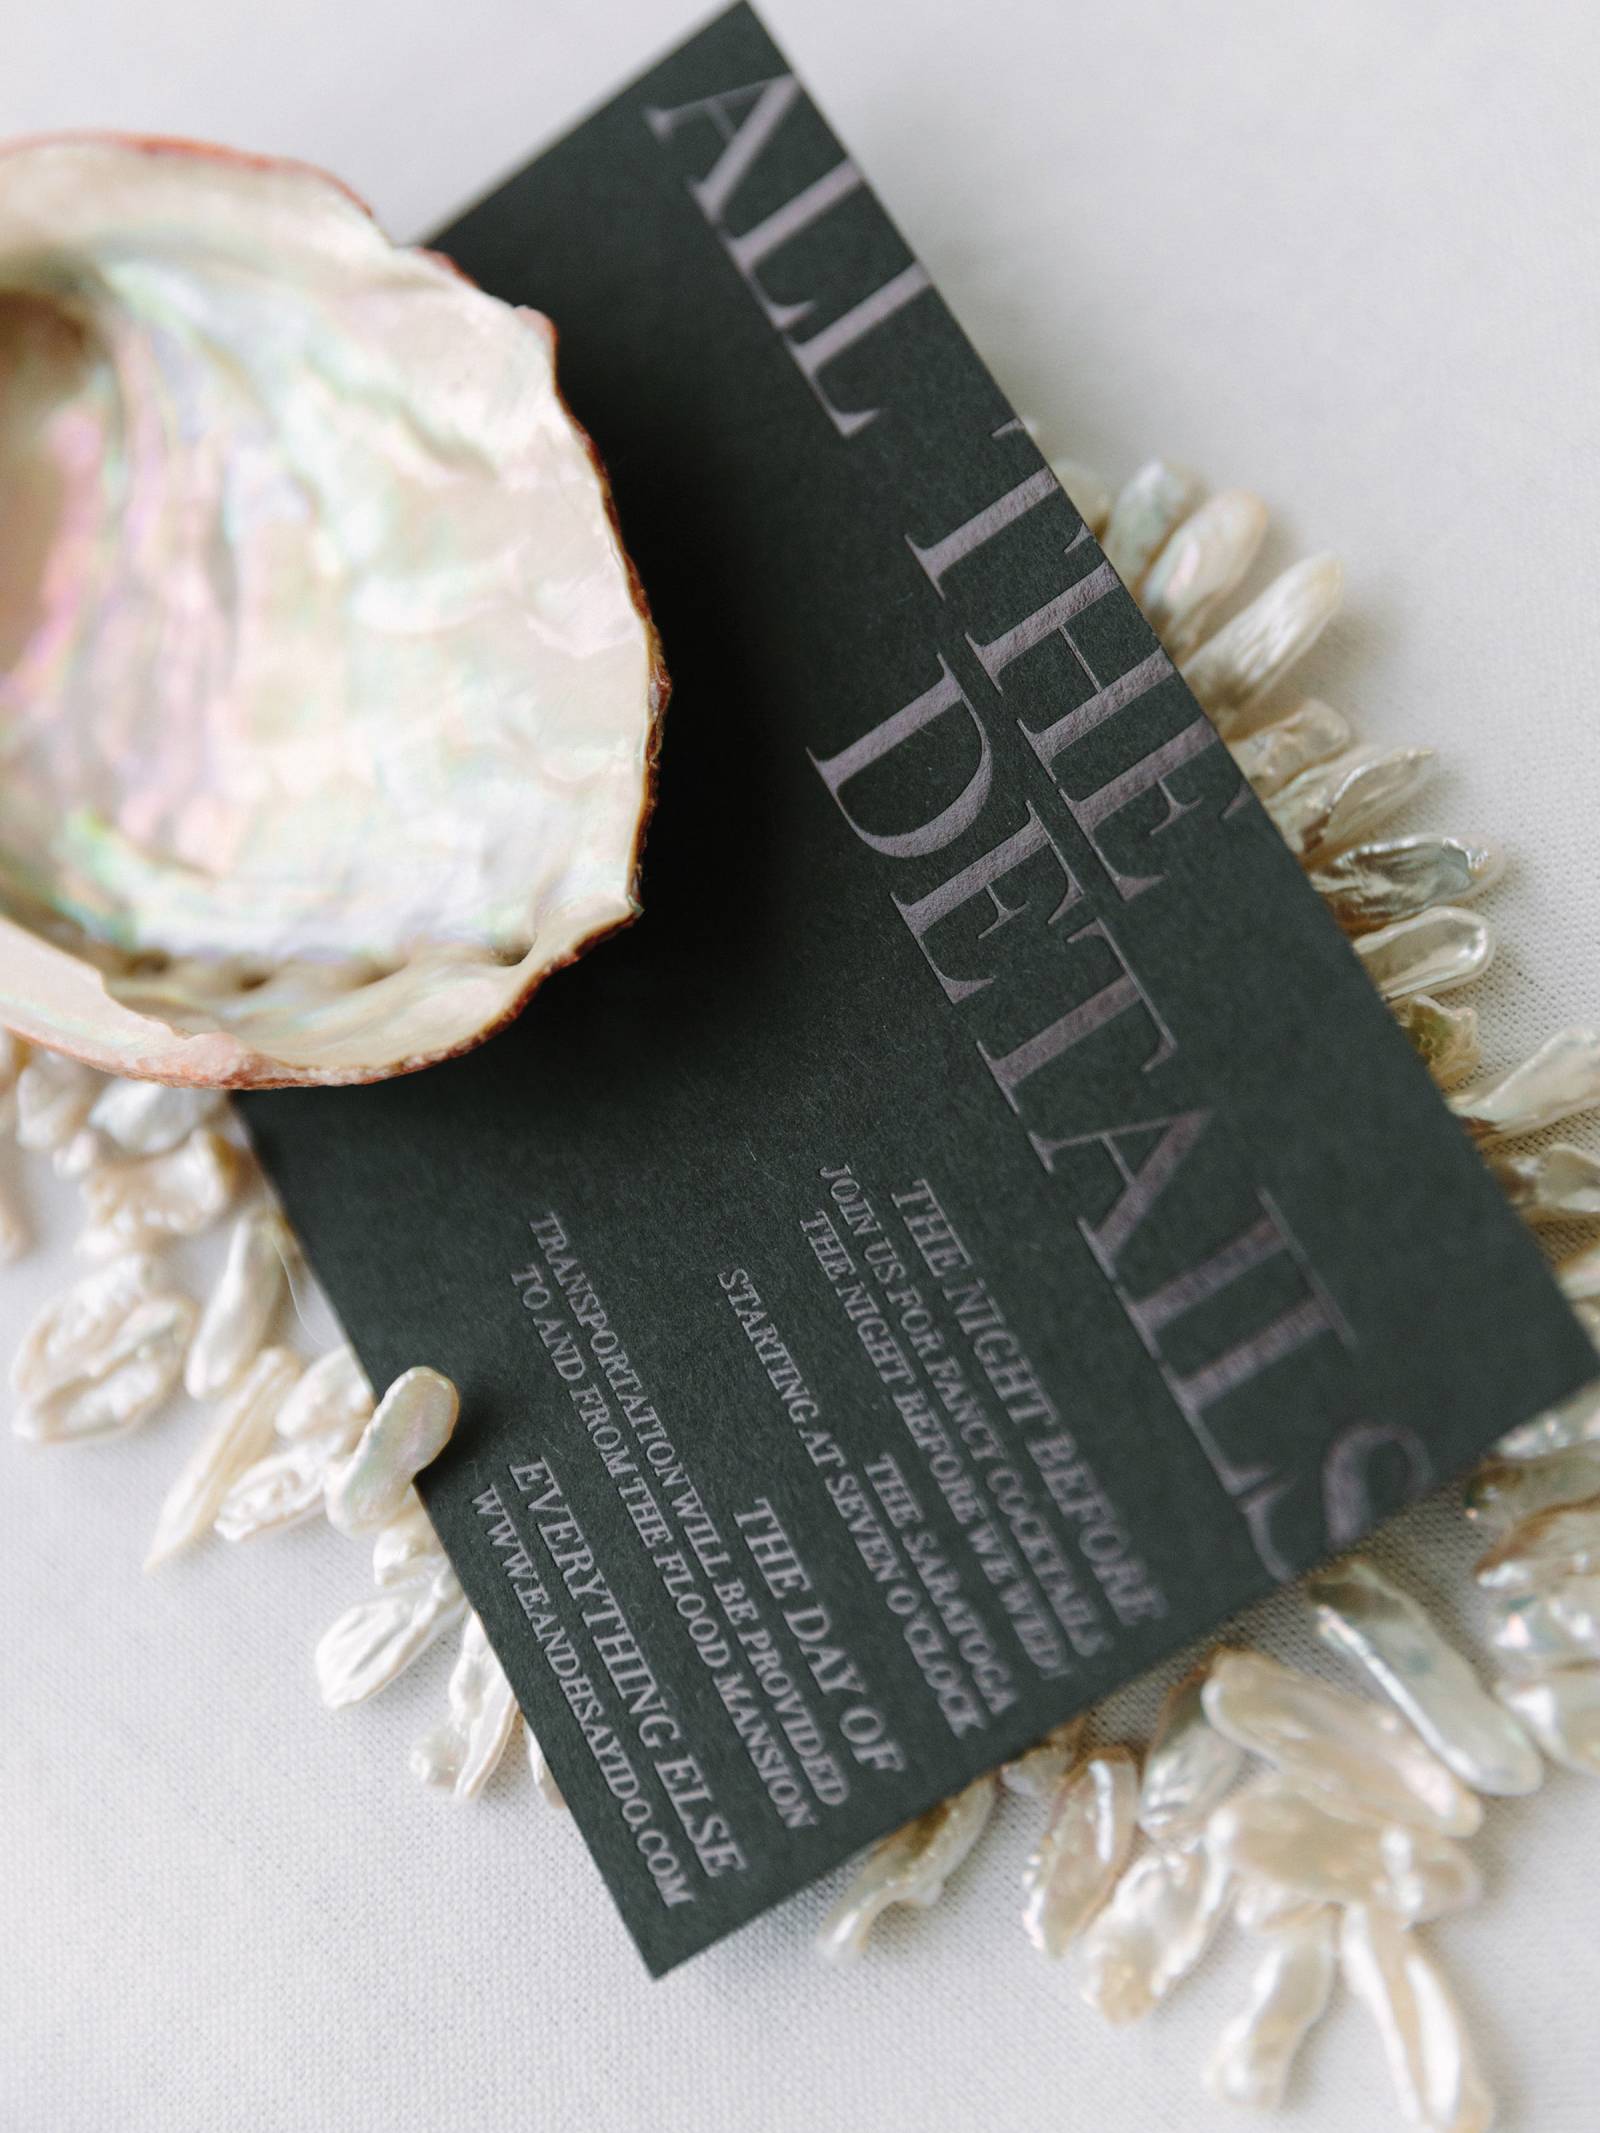 Black wedding stationery enclosure with silver lettering, framed by fresh water pearls and shell.